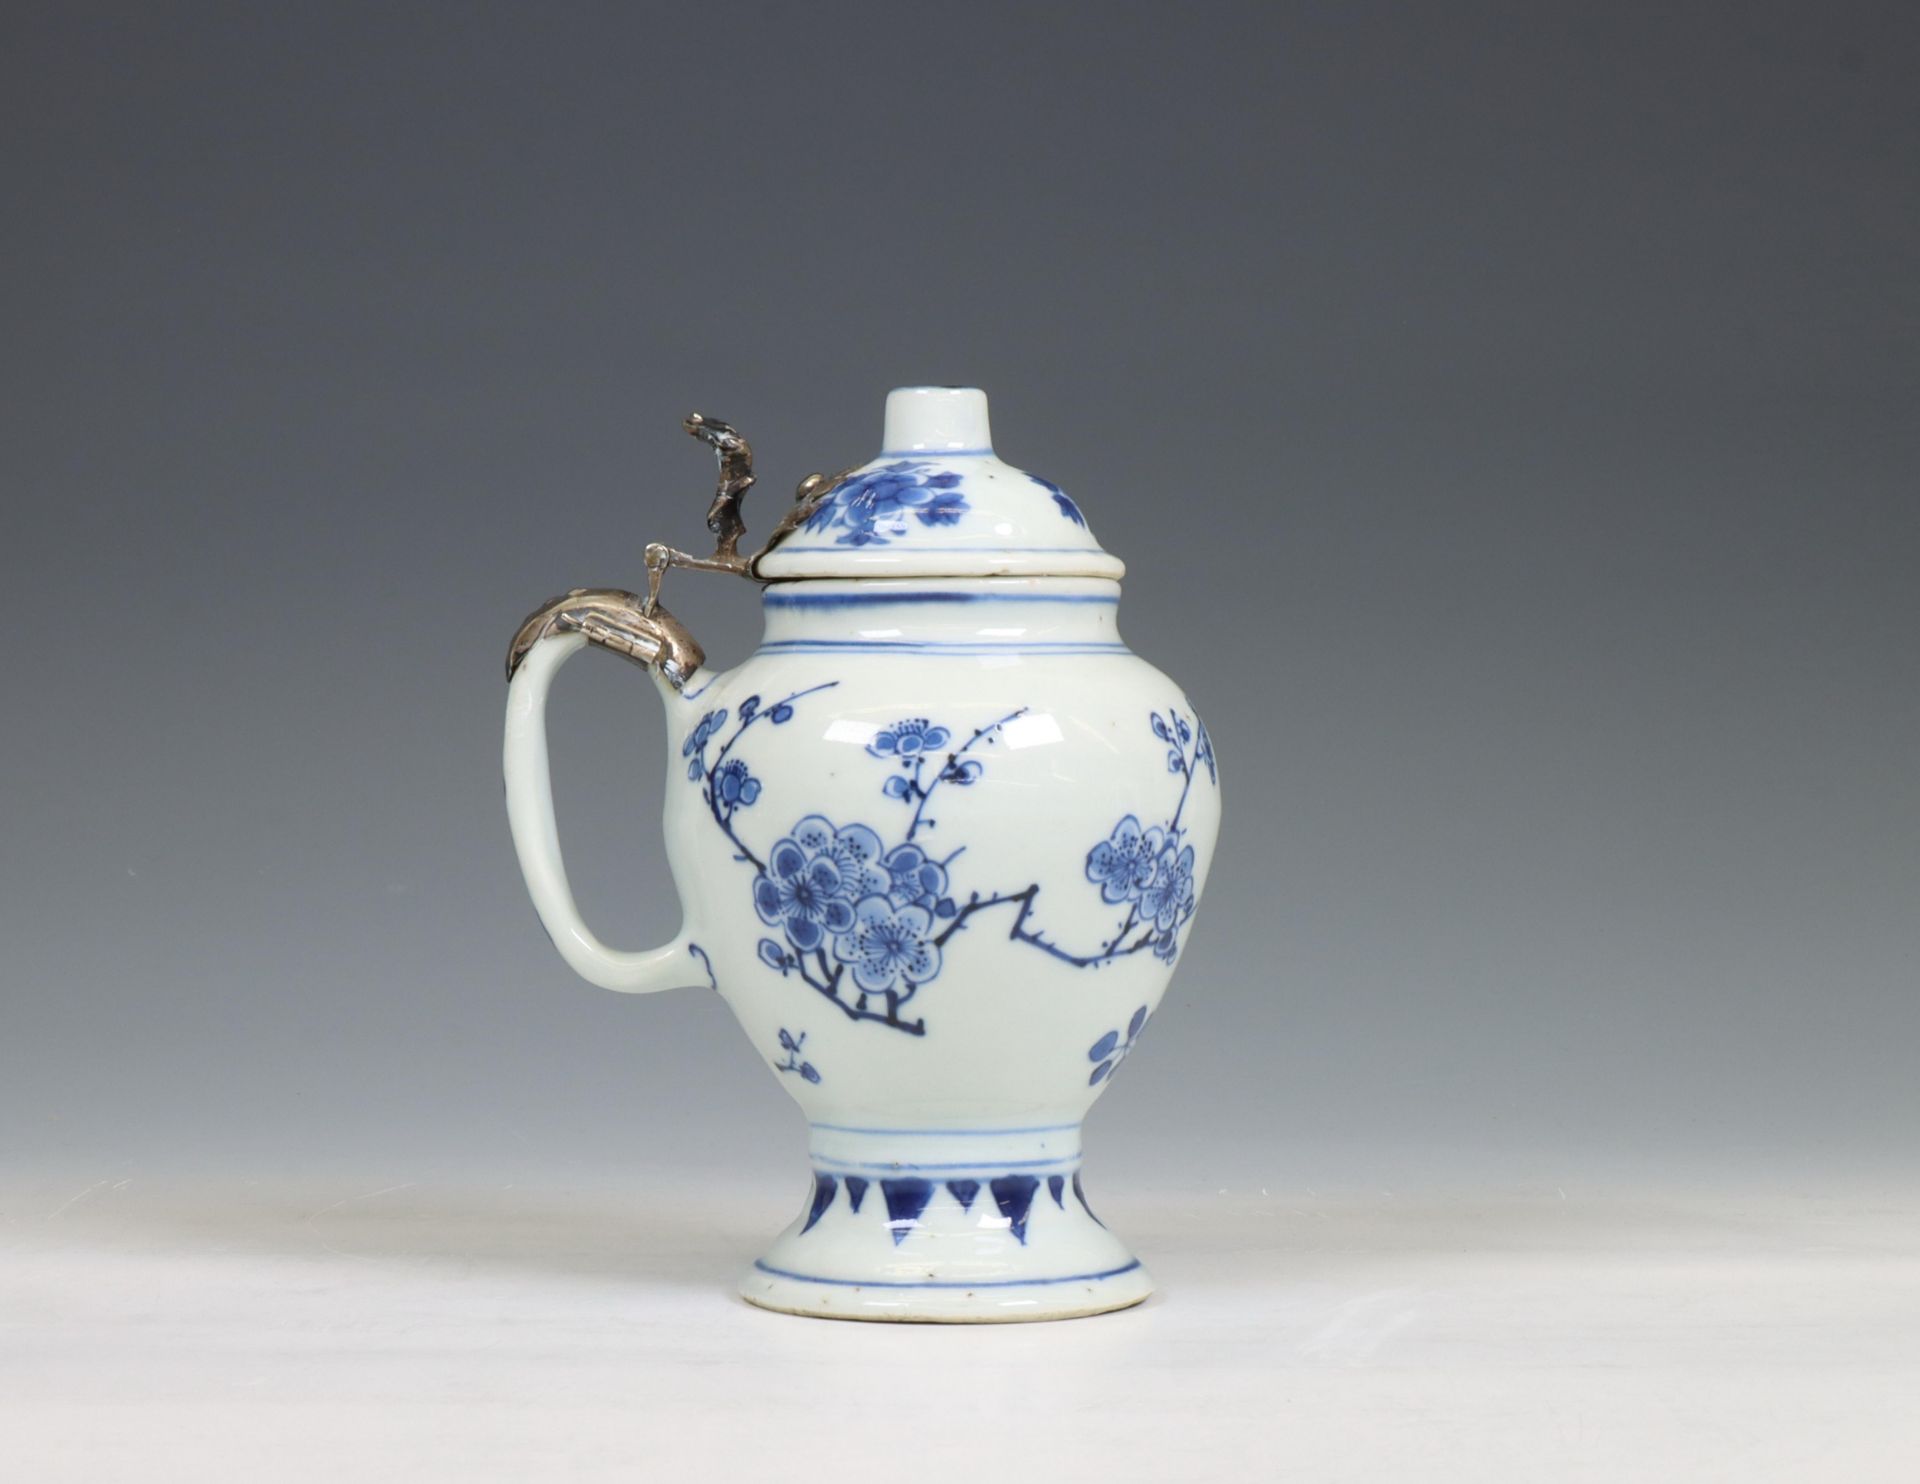 China, a Transitional silver-mounted blue and white mustard-pot and associated cover, mid 17th centu - Image 2 of 6